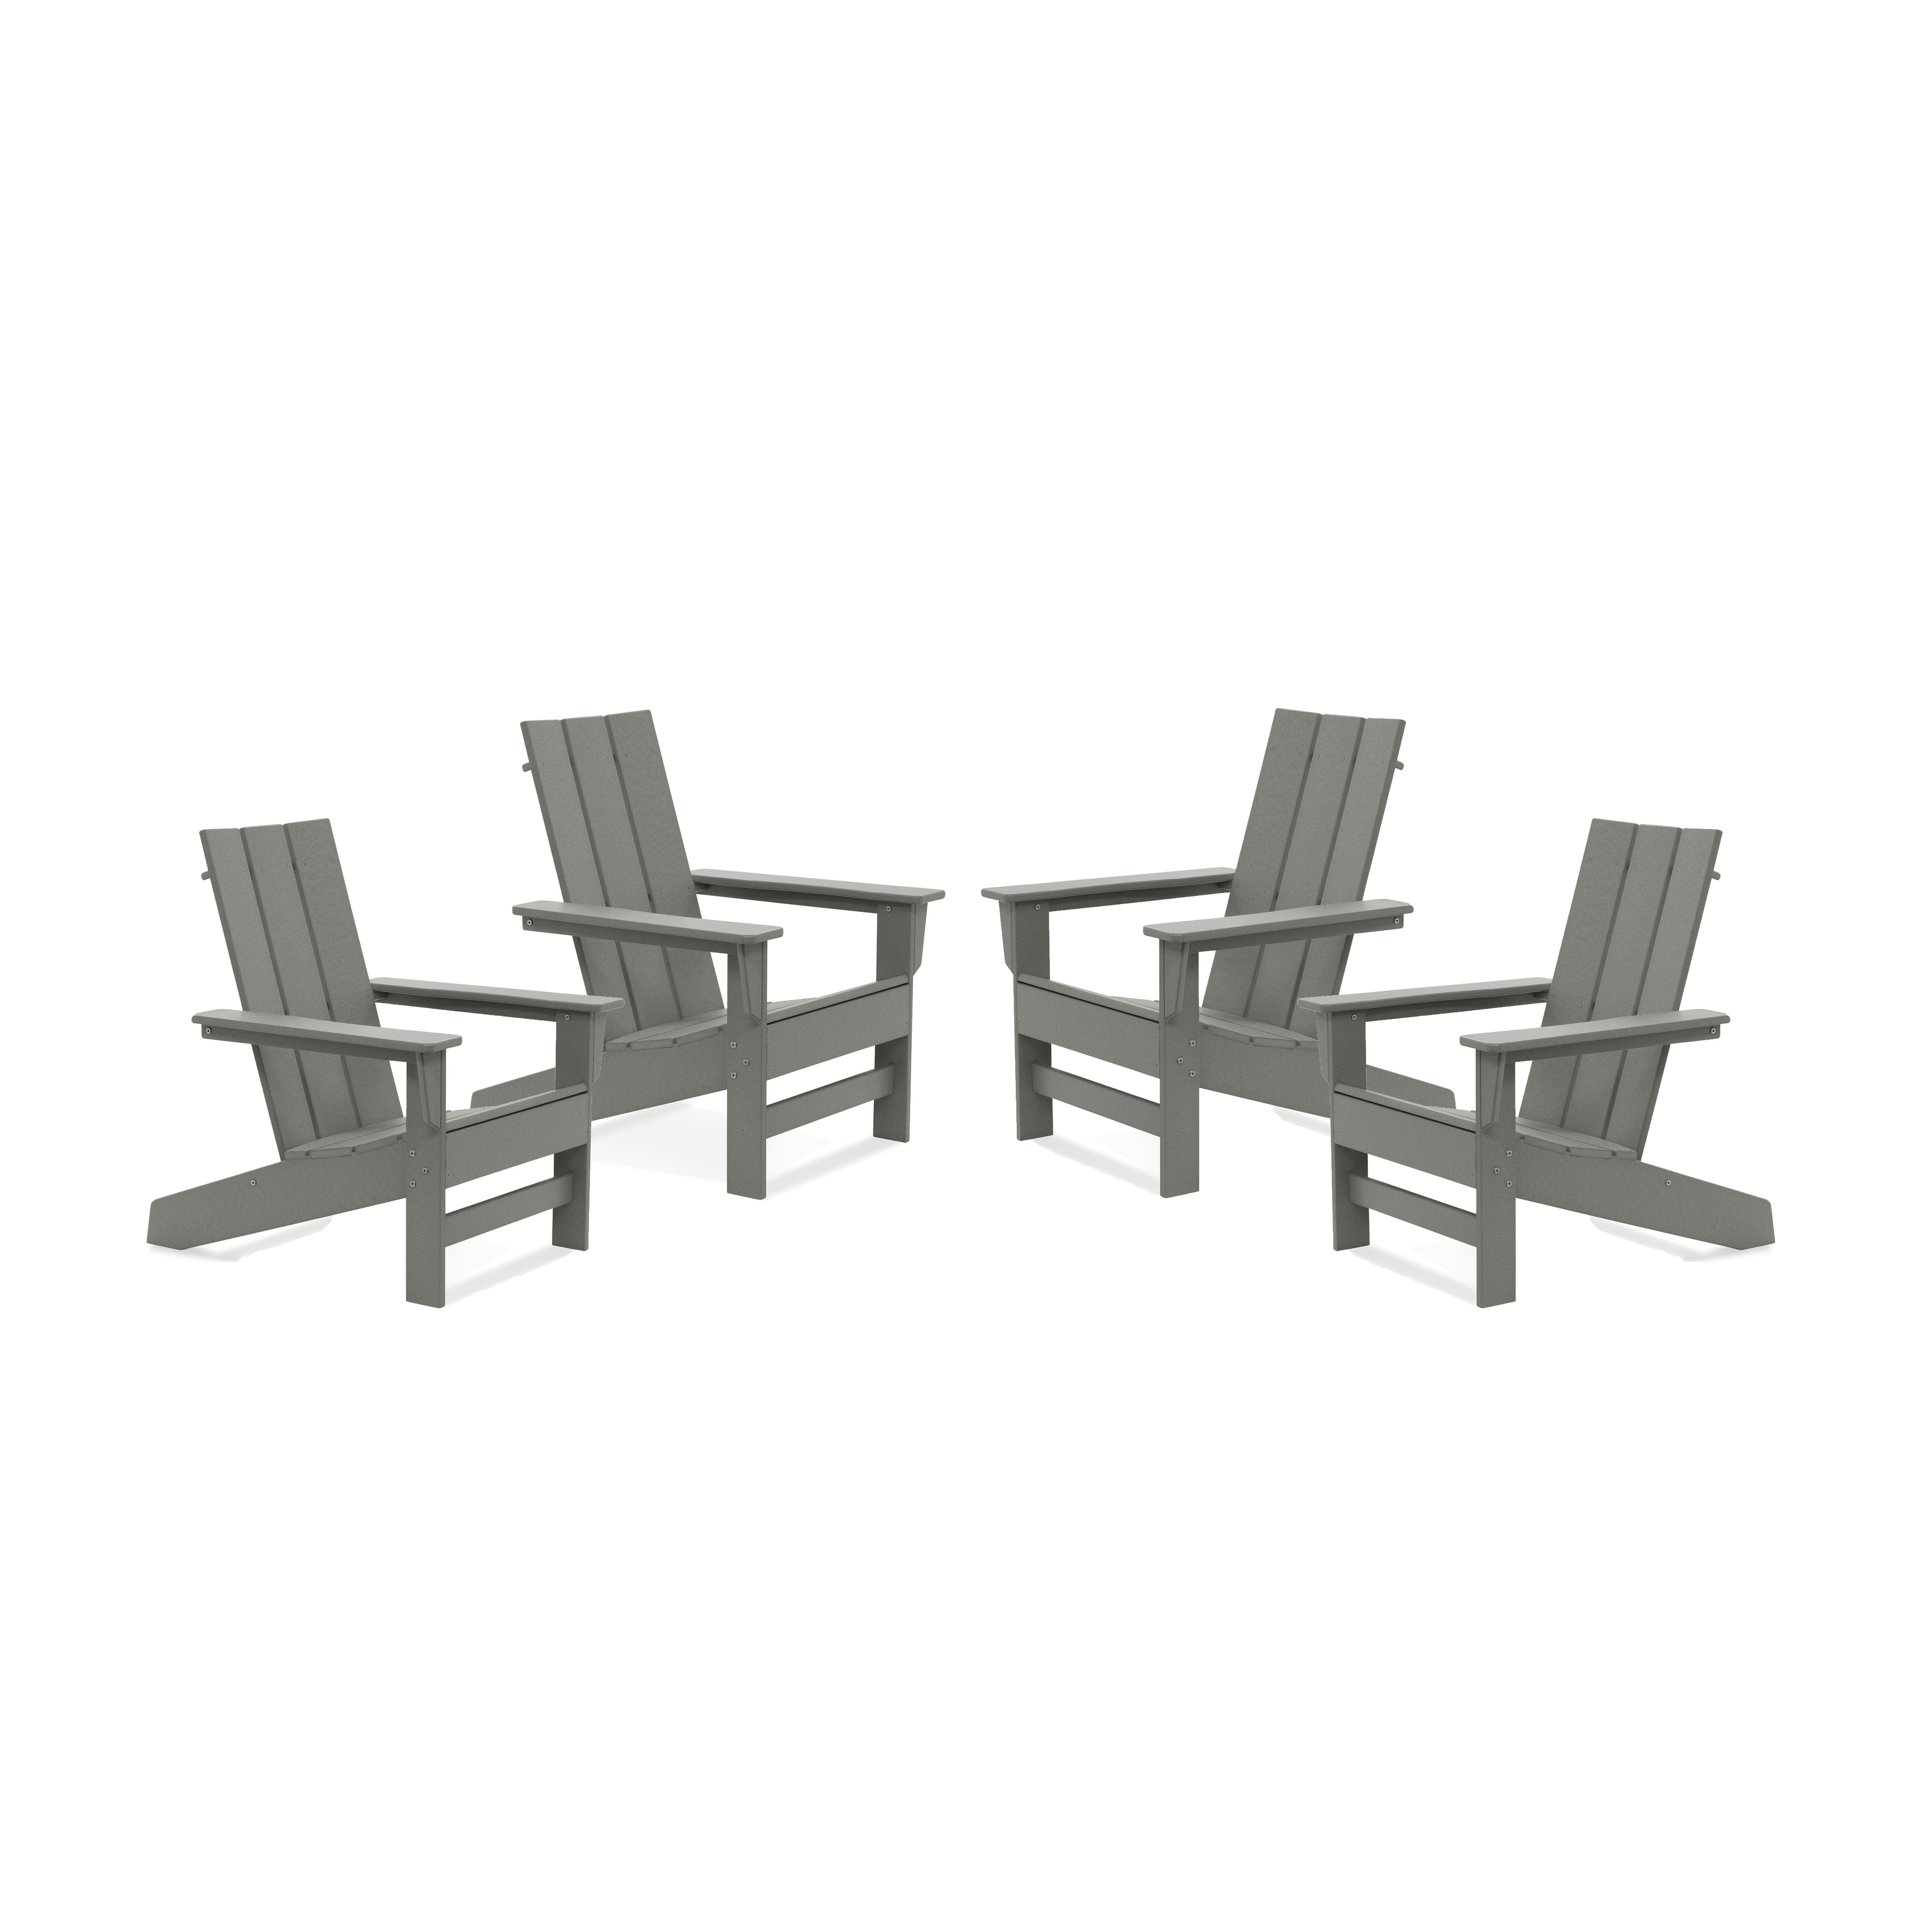 Hawkesbury Recycled Plastic Adirondack Chair (set Of 4) By Havenside Home